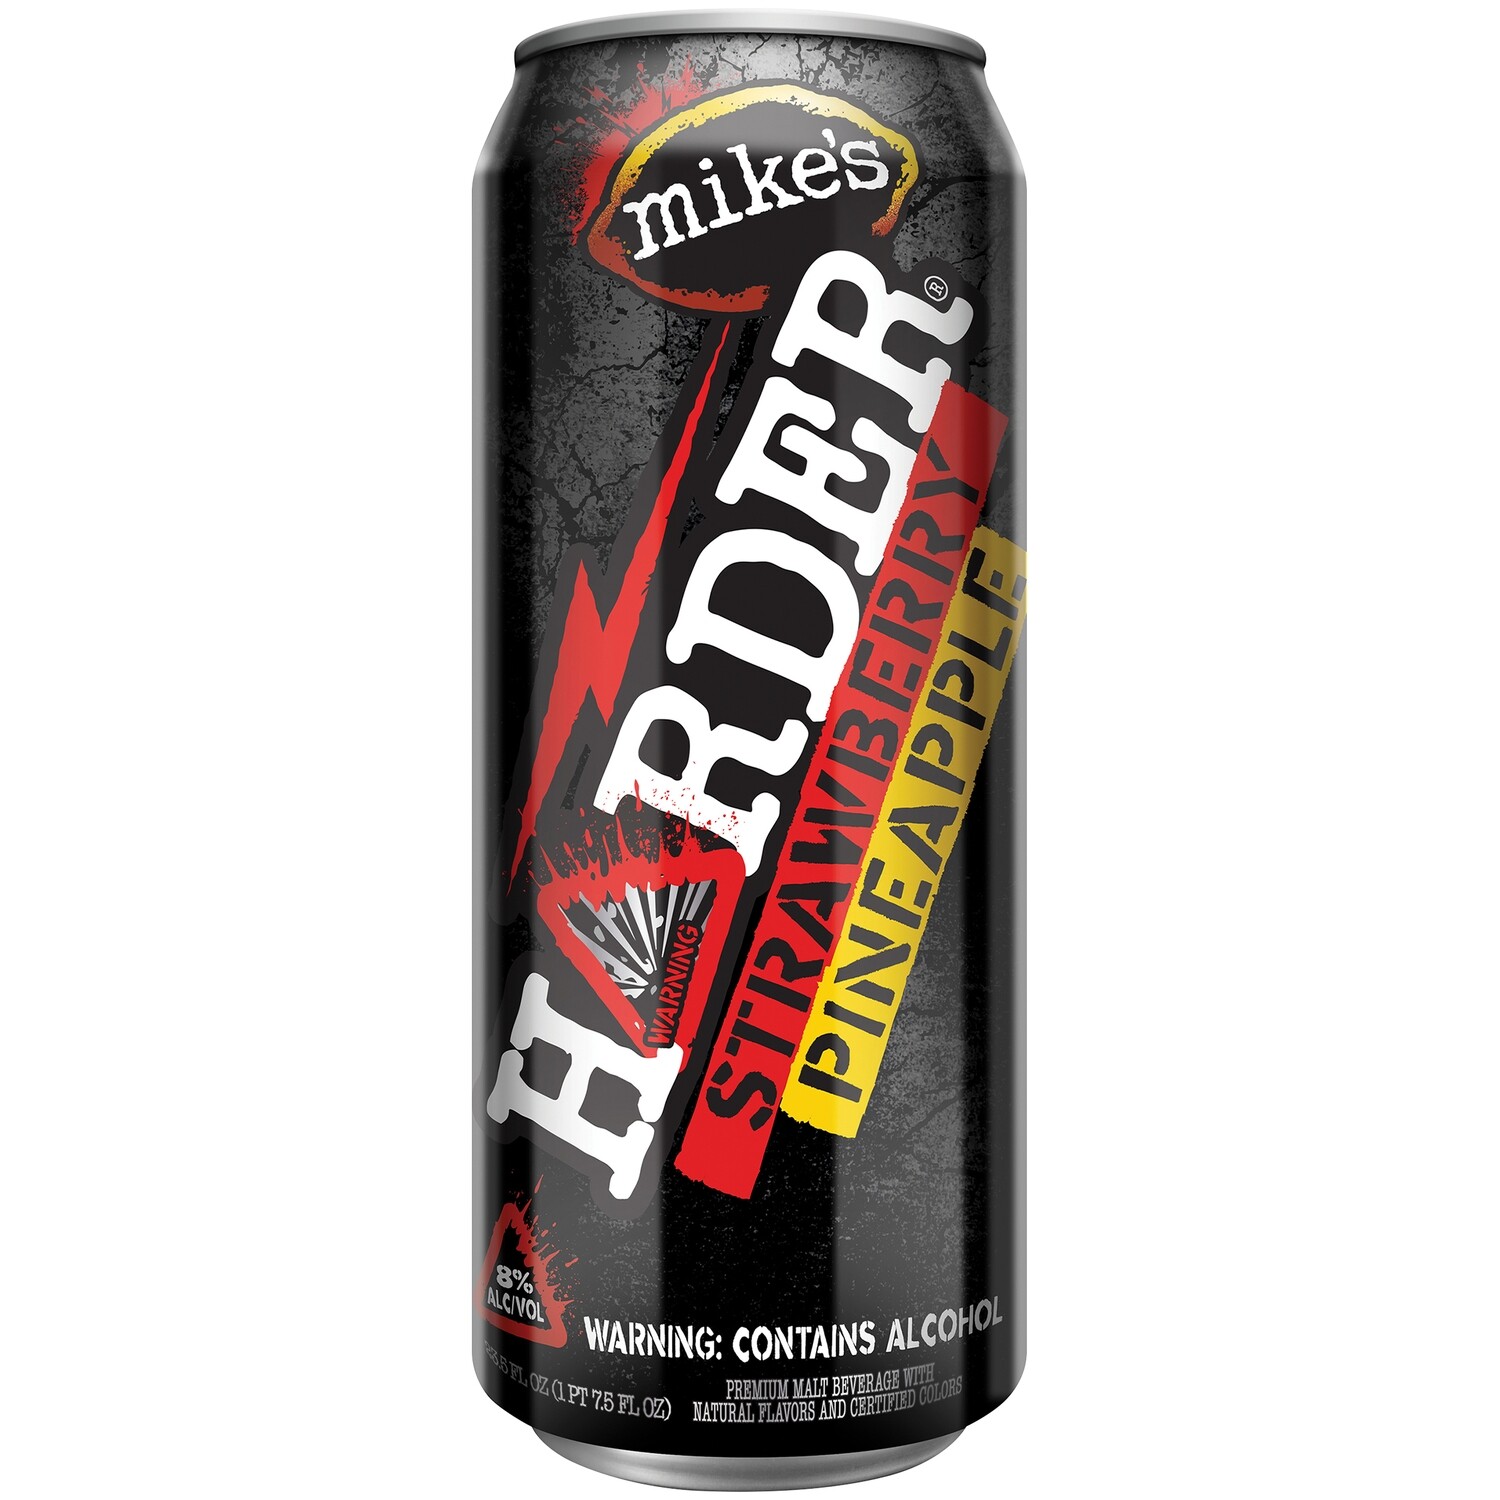 Mike's Harder Strawberry Pineapple 25oz can